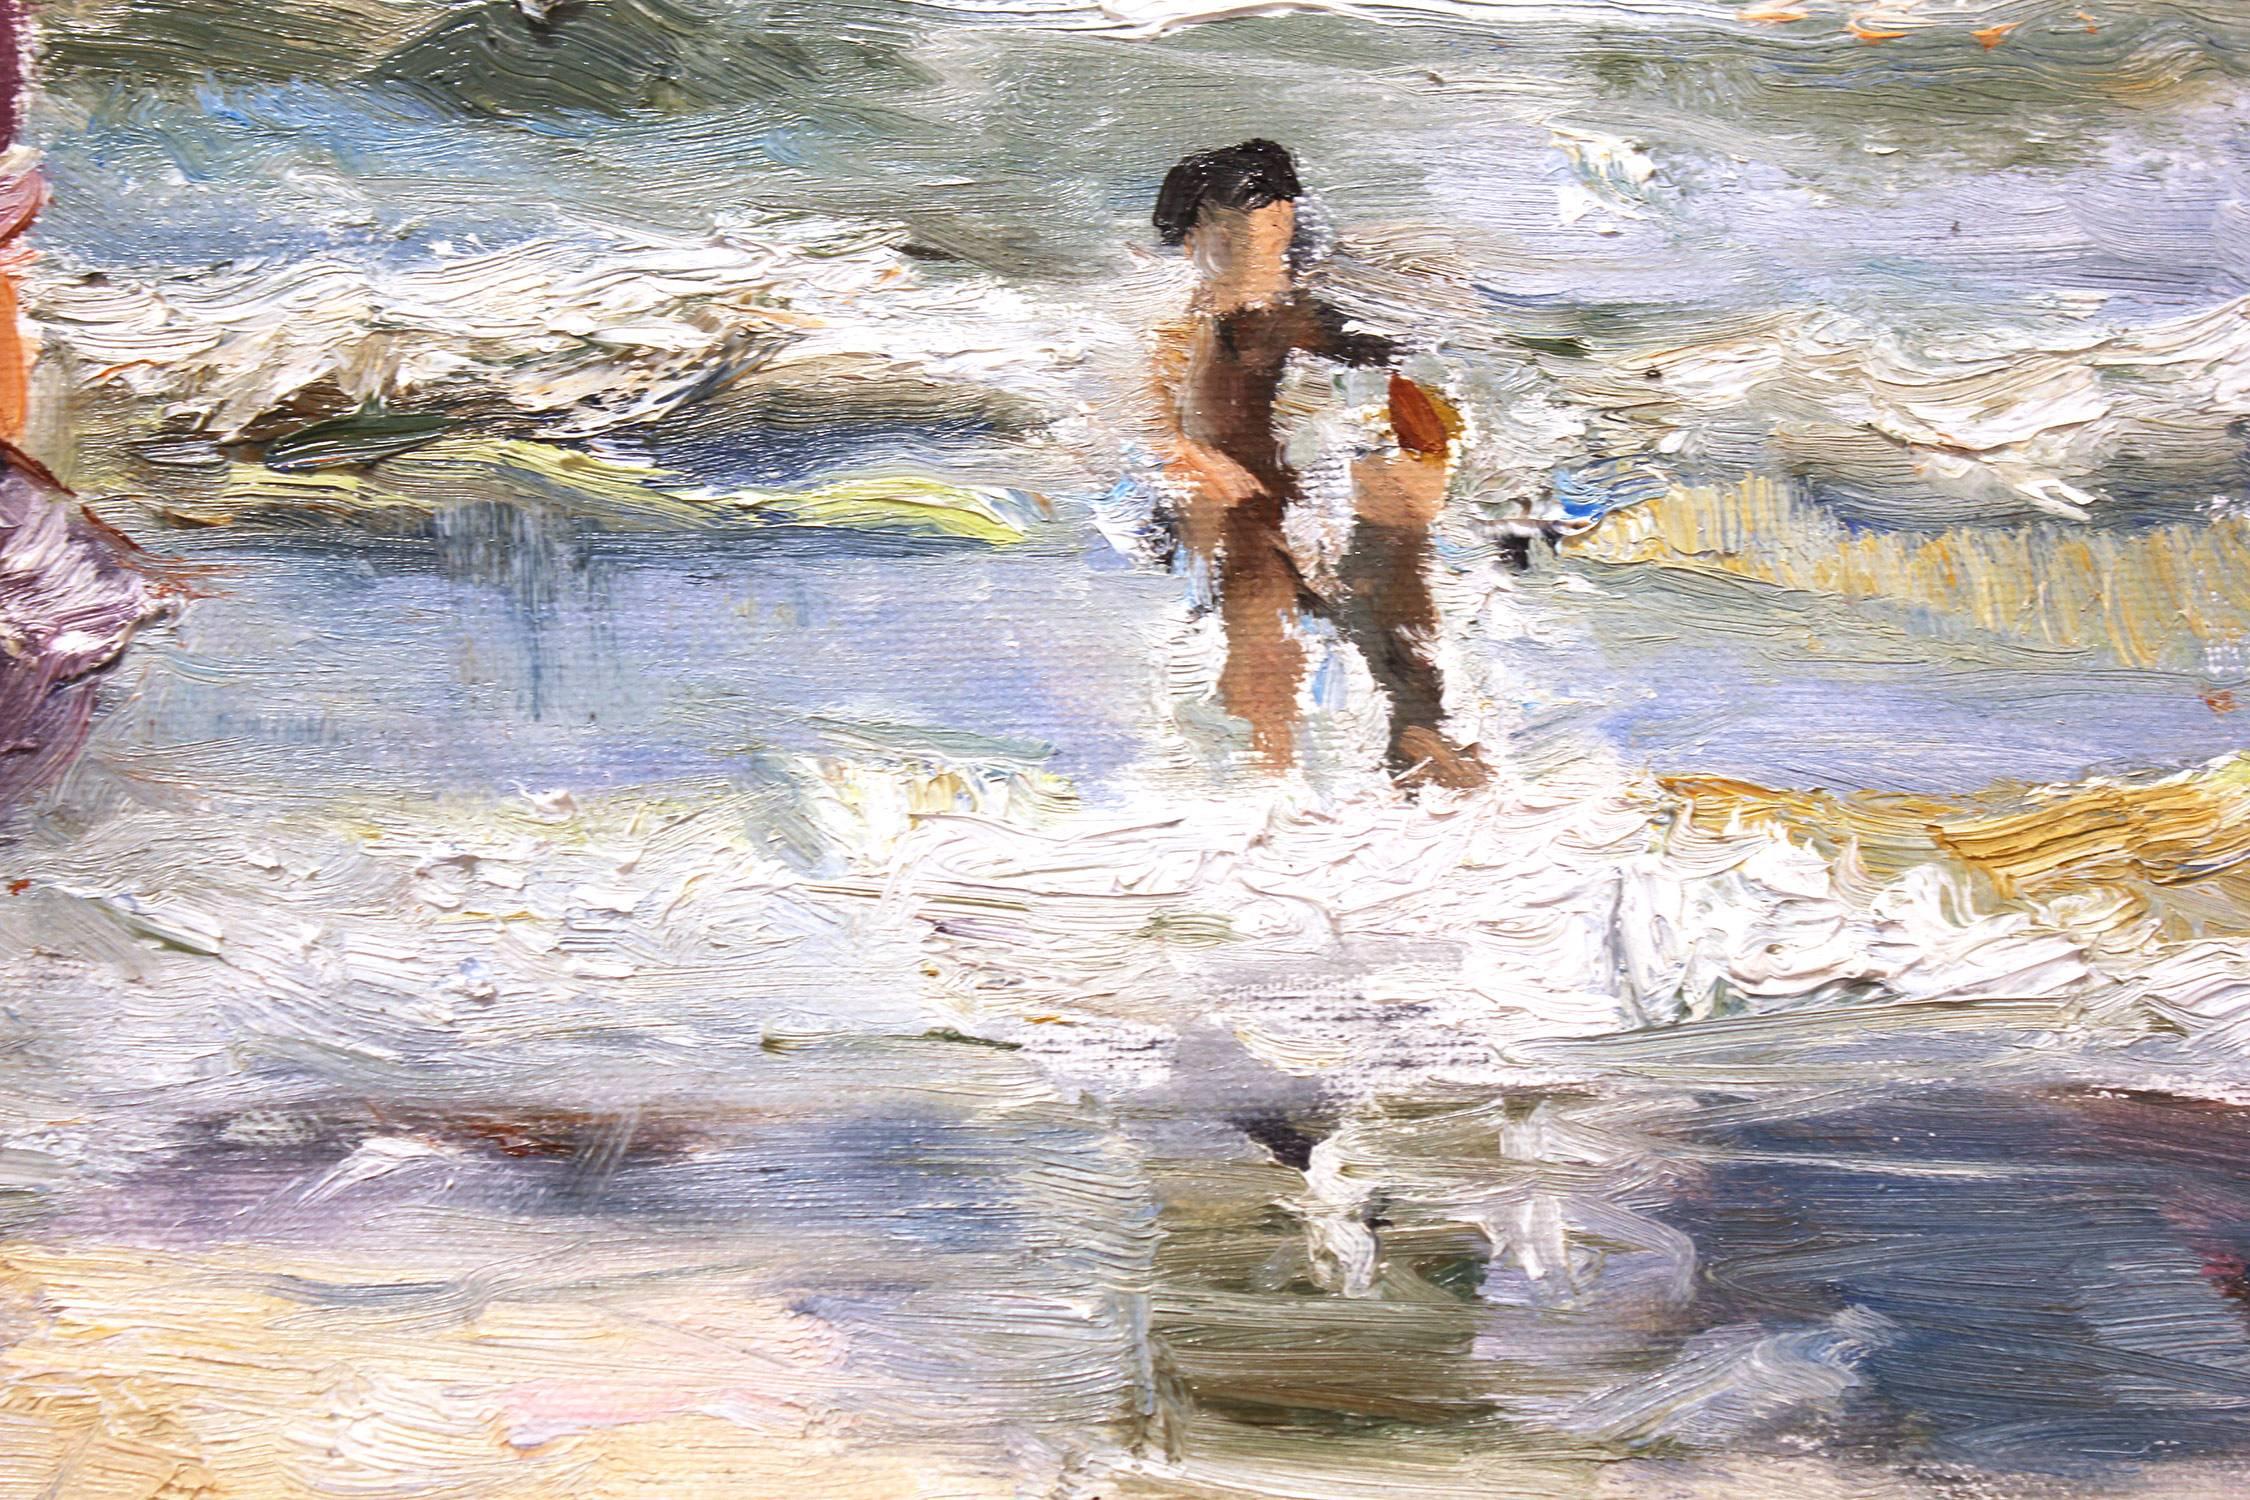 This painting depicts an impressionistic scene at the beach with beautiful brushwork and whimsical colors. The work is a following of Edward Potthast, capturing the beach and times of the early 20th Century similarly to his work. This piece is